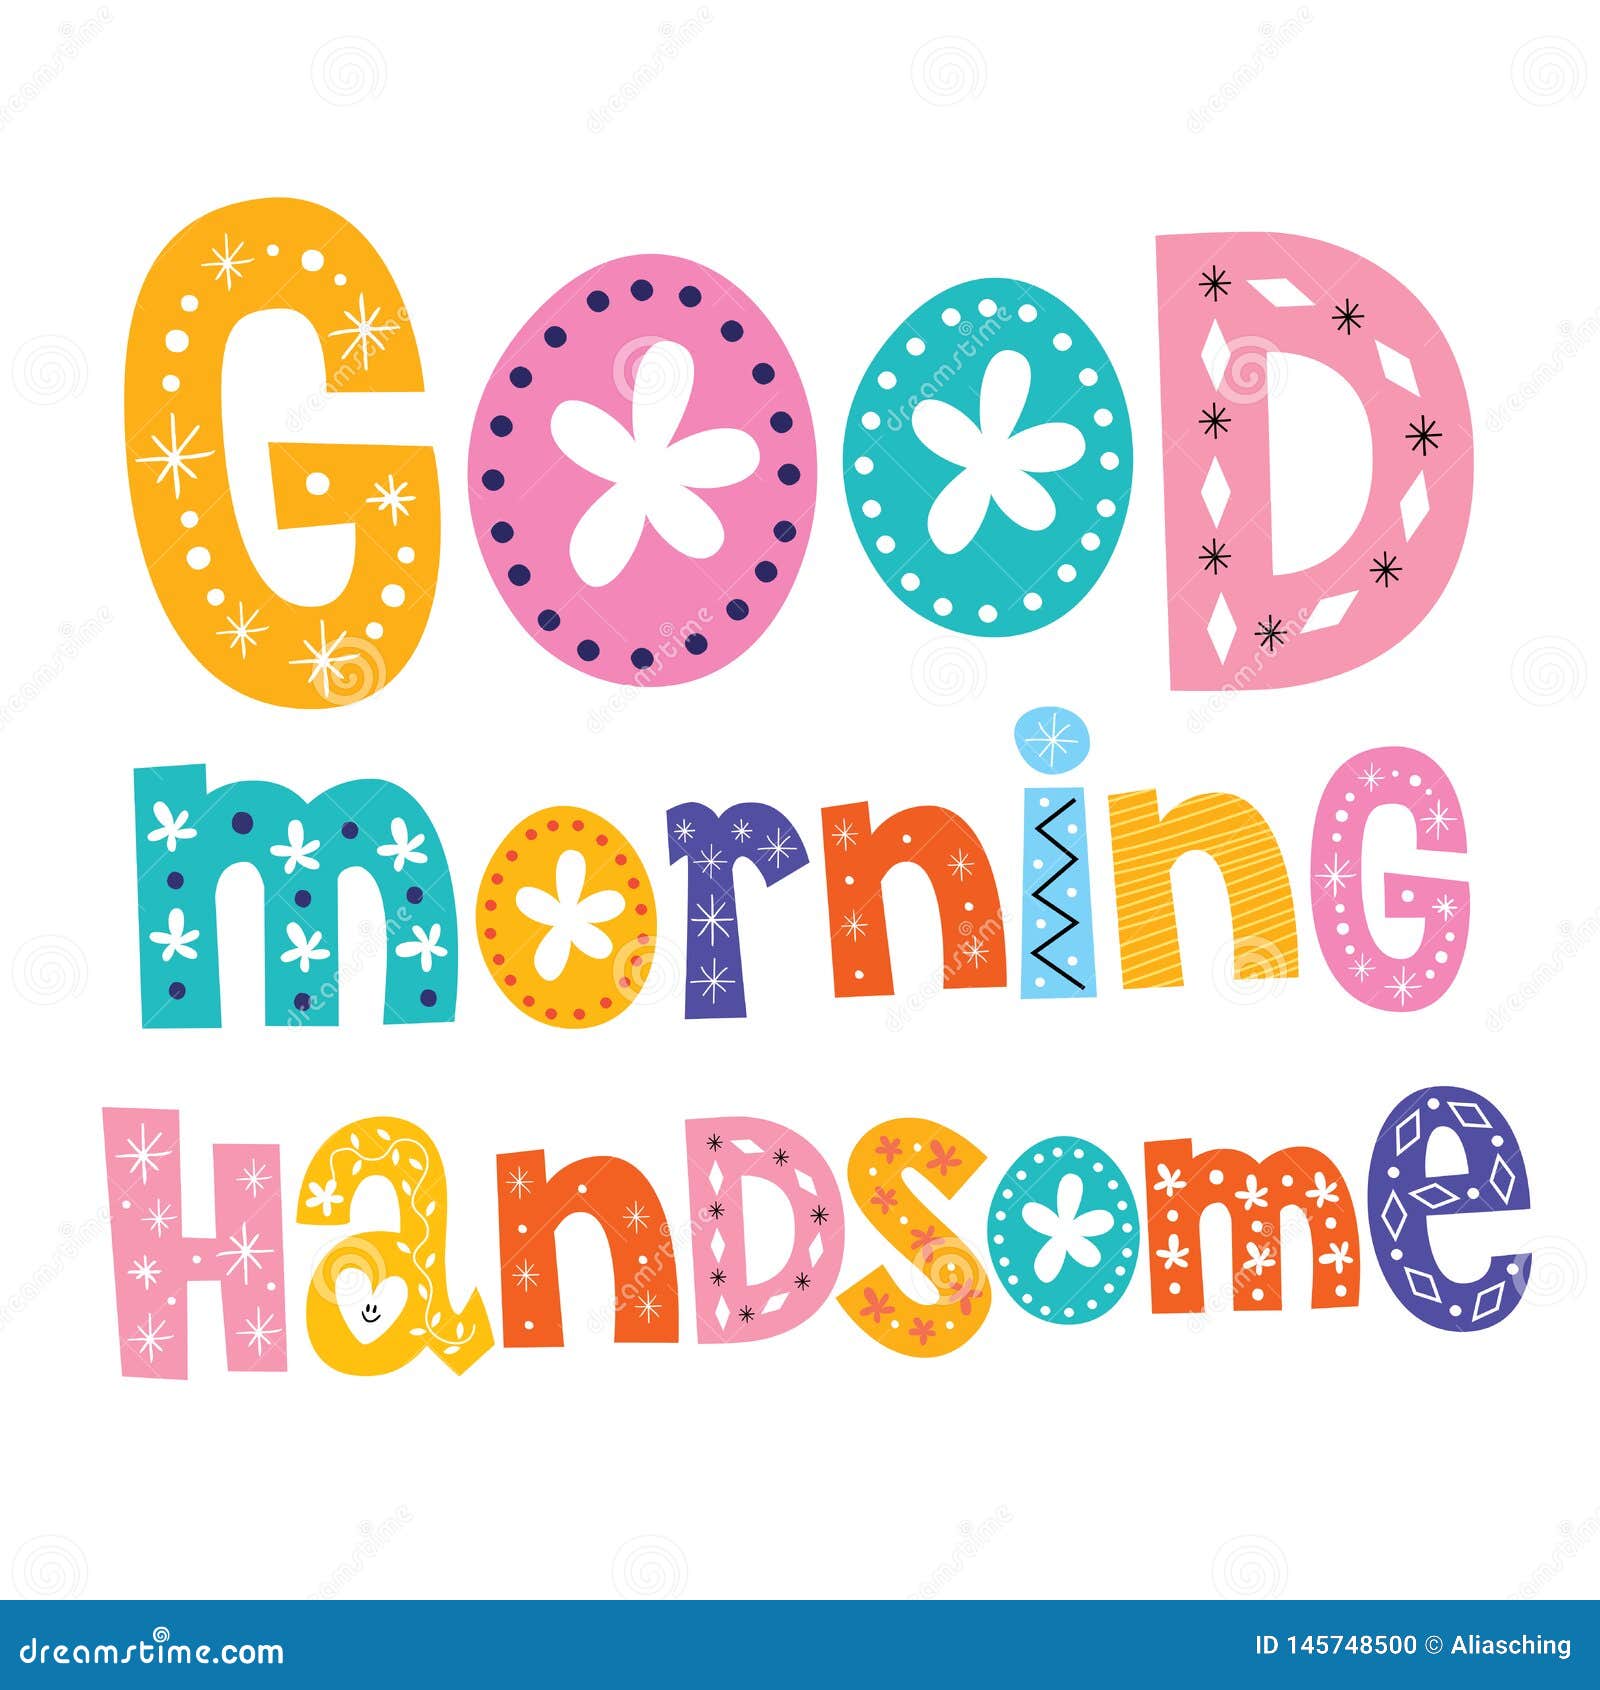 Good morning handsome stock vector. Illustration of looking - 145748500